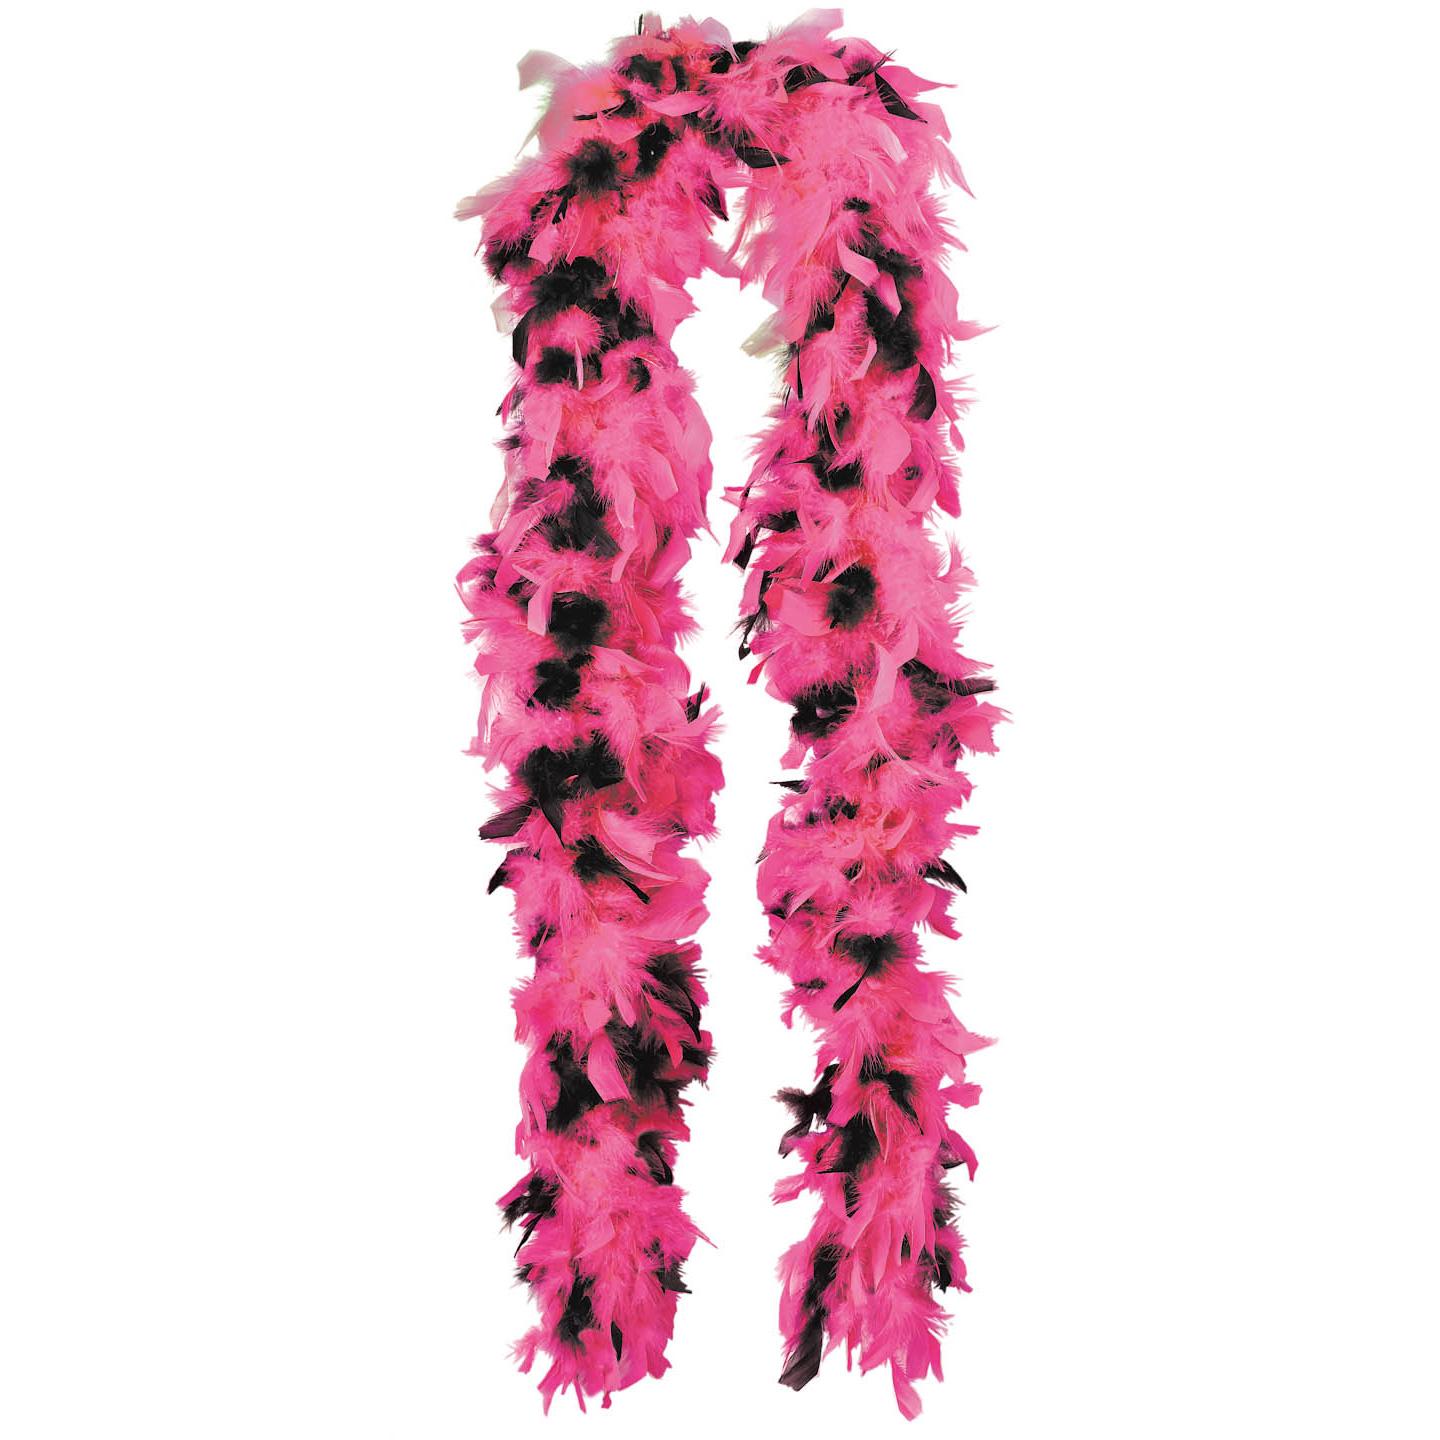 Sweet 16 Sparkle feather Boa 72in Costumes & Apparel - Party Centre